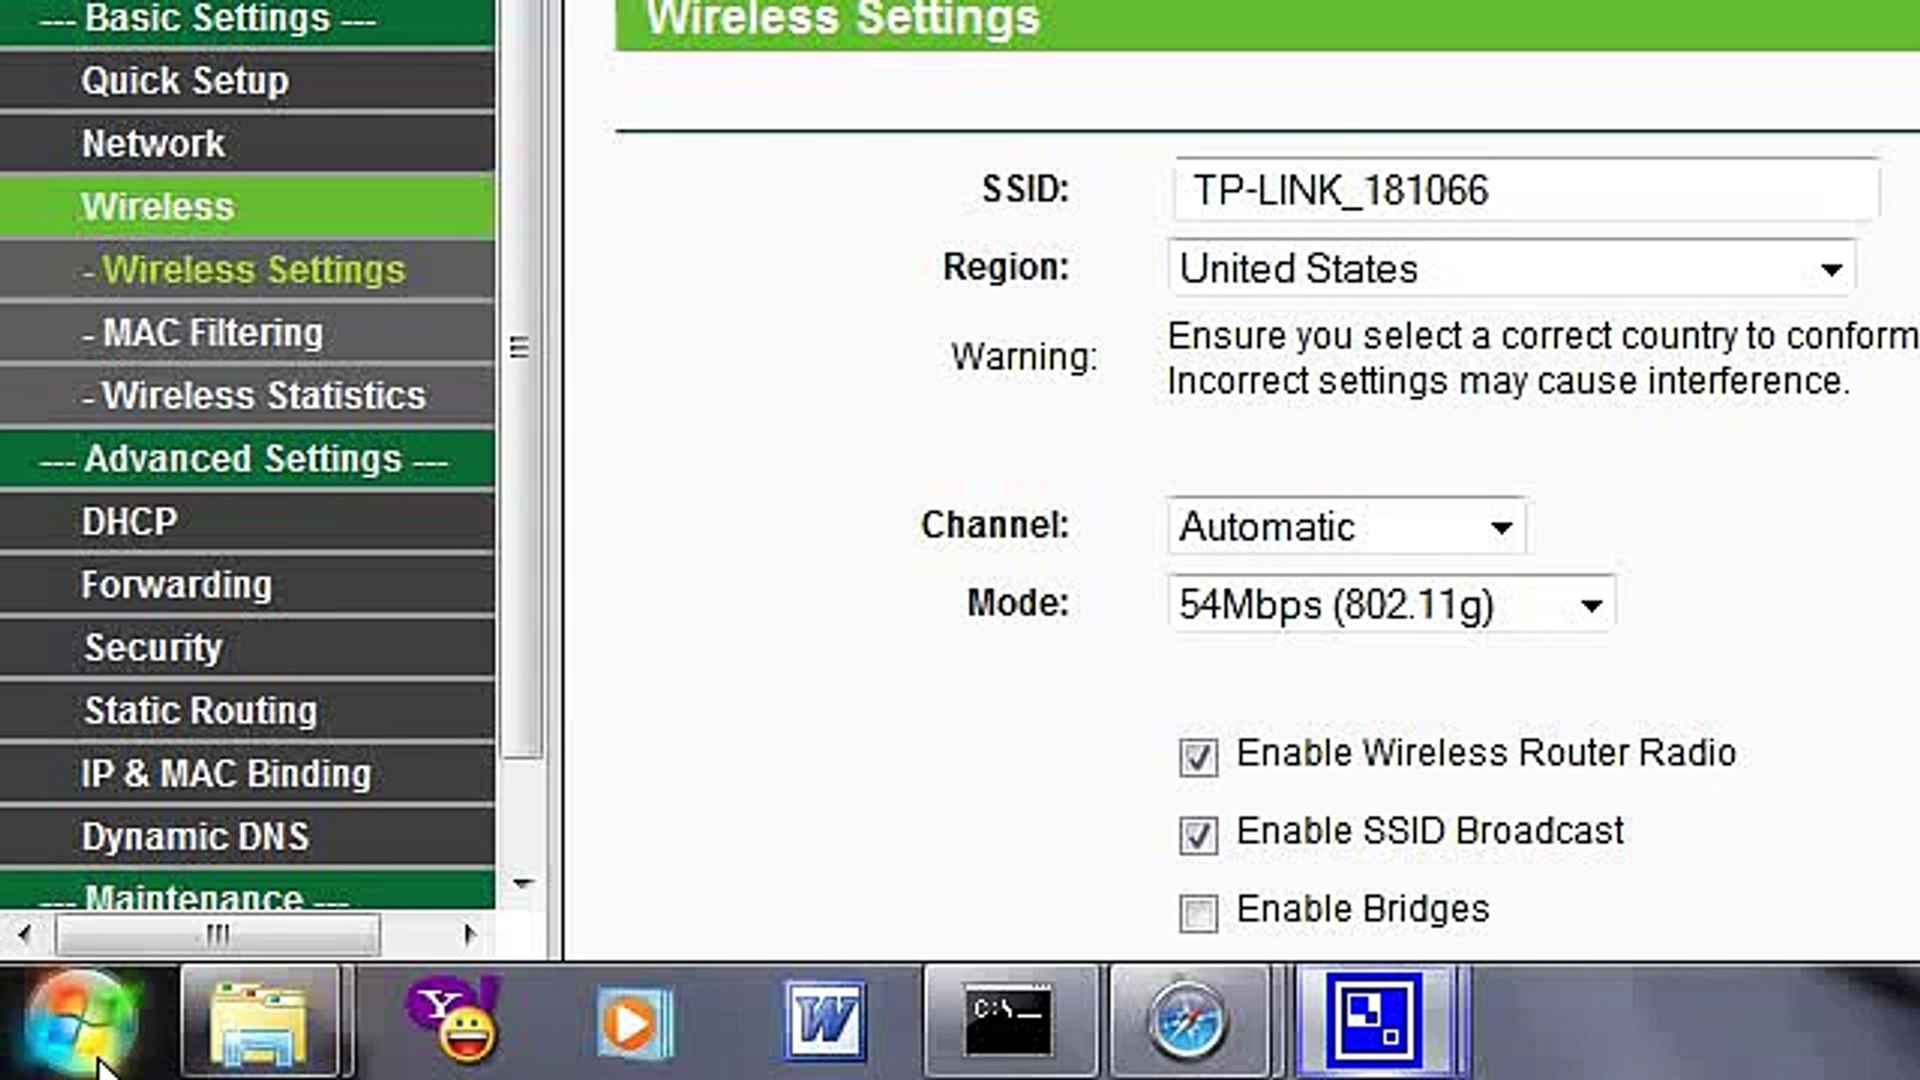 TP-Link wireless router quick setup 